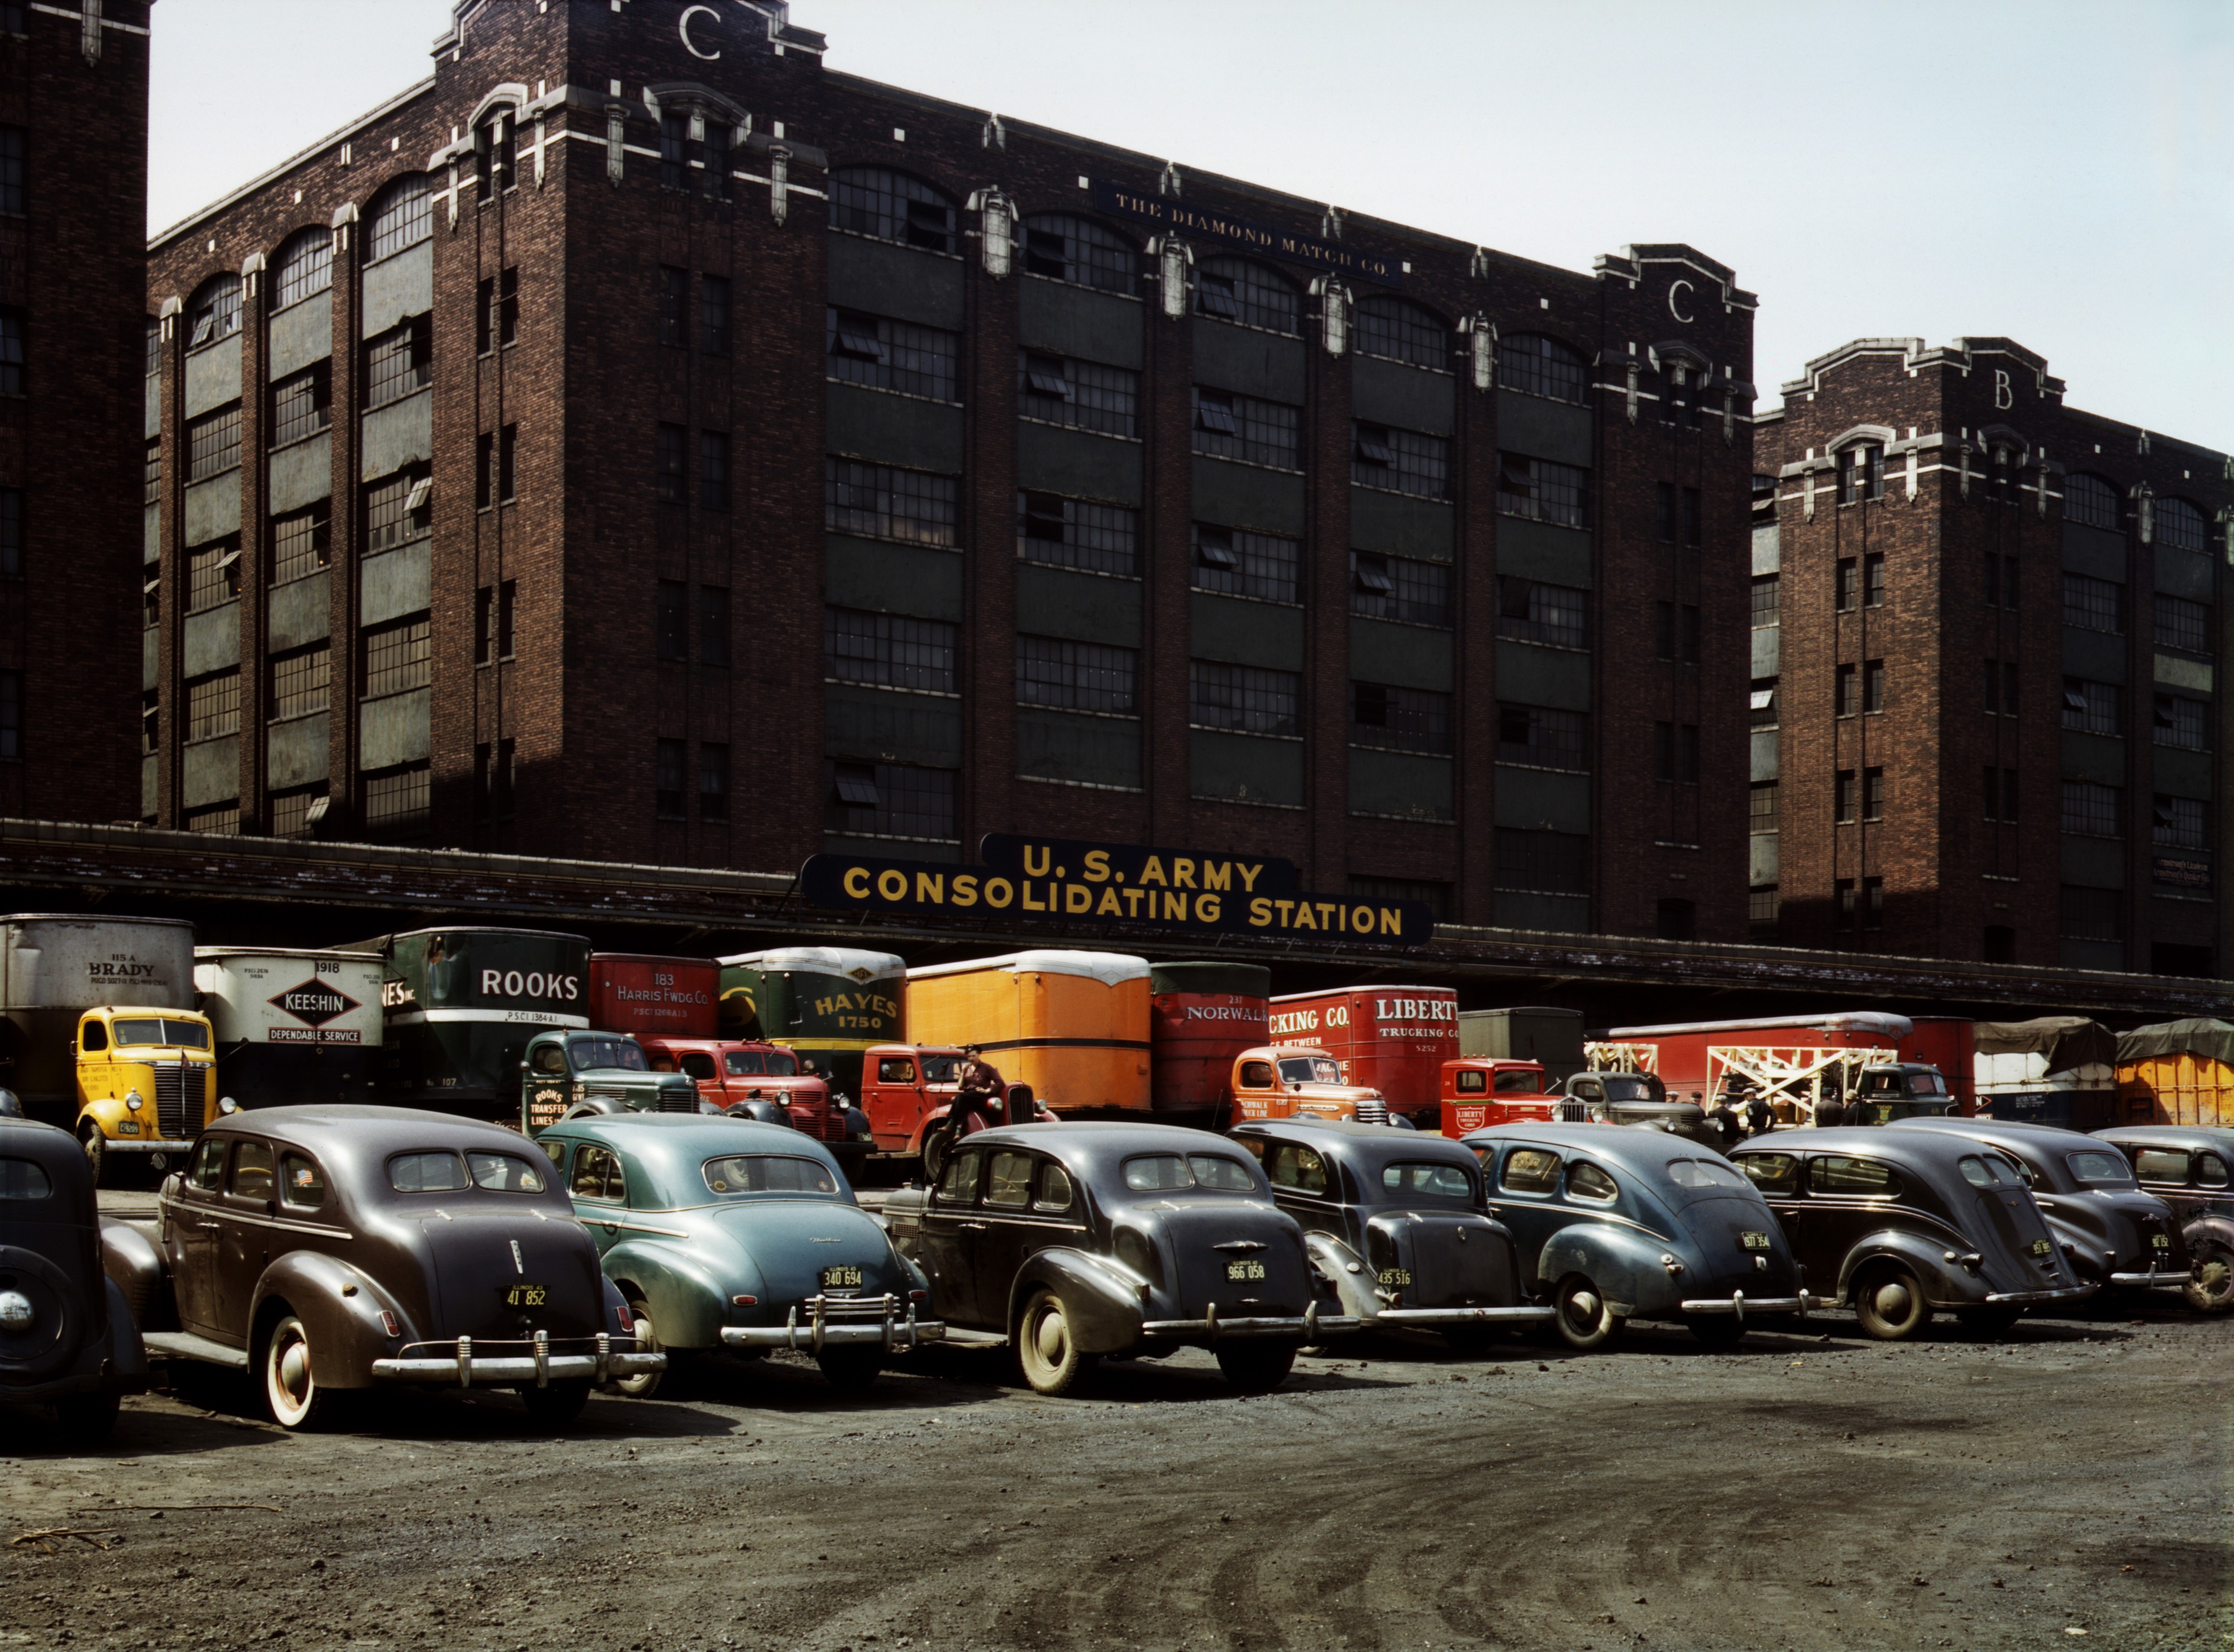 Flickr - …trialsanderrors - Jack Delano, Freight depot of the U.S. Army consolidating station, Chicago, 1943